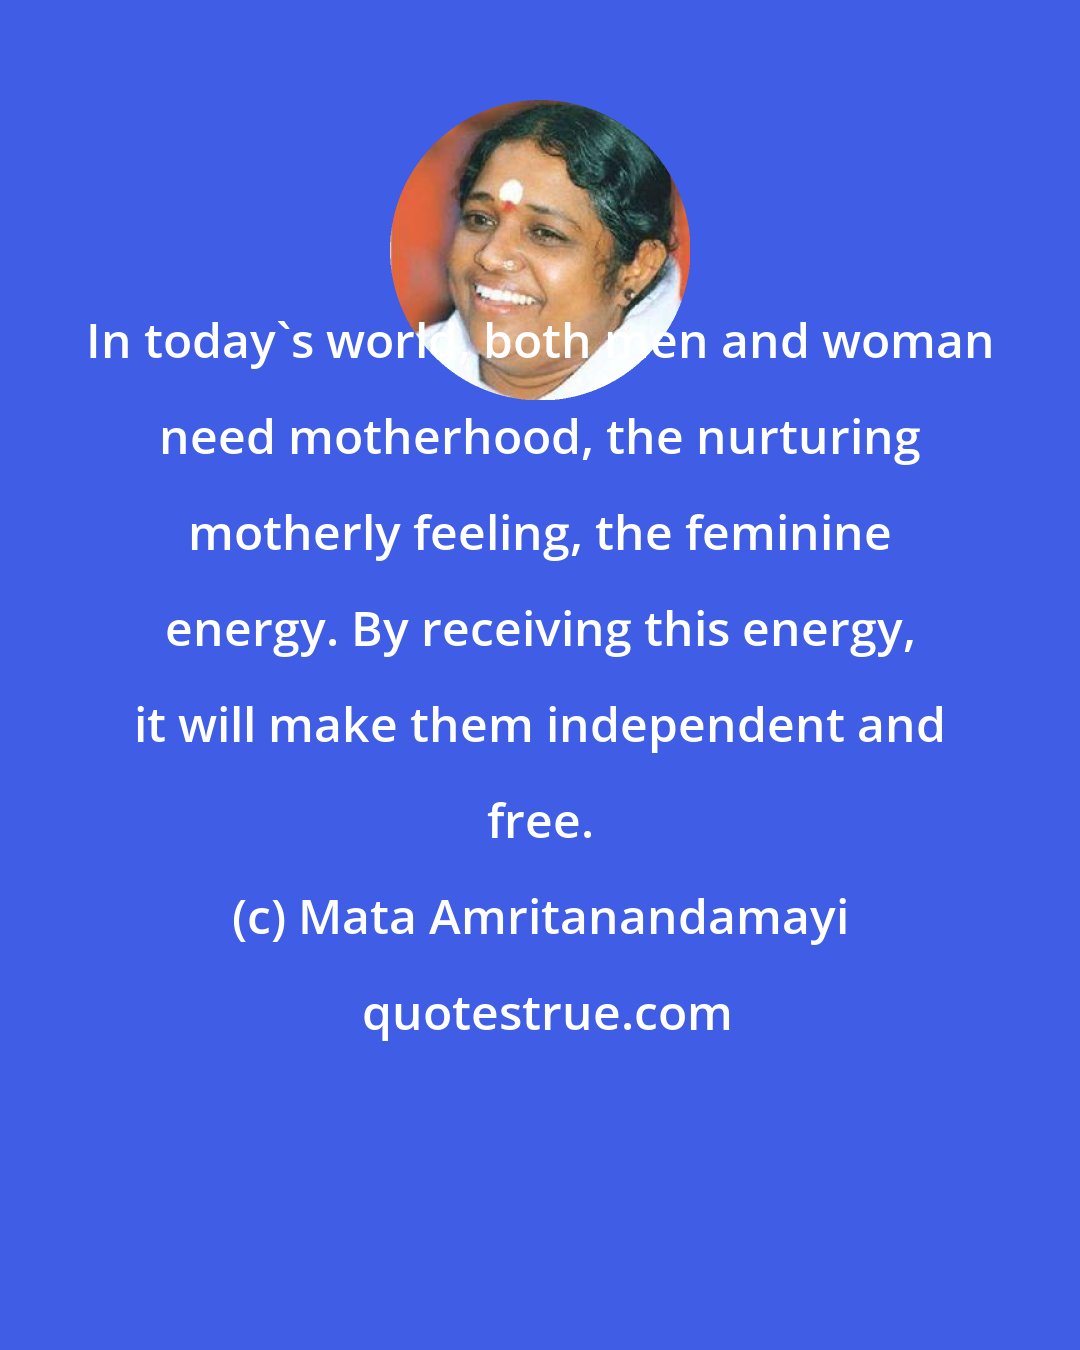 Mata Amritanandamayi: In today's world, both men and woman need motherhood, the nurturing motherly feeling, the feminine energy. By receiving this energy, it will make them independent and free.